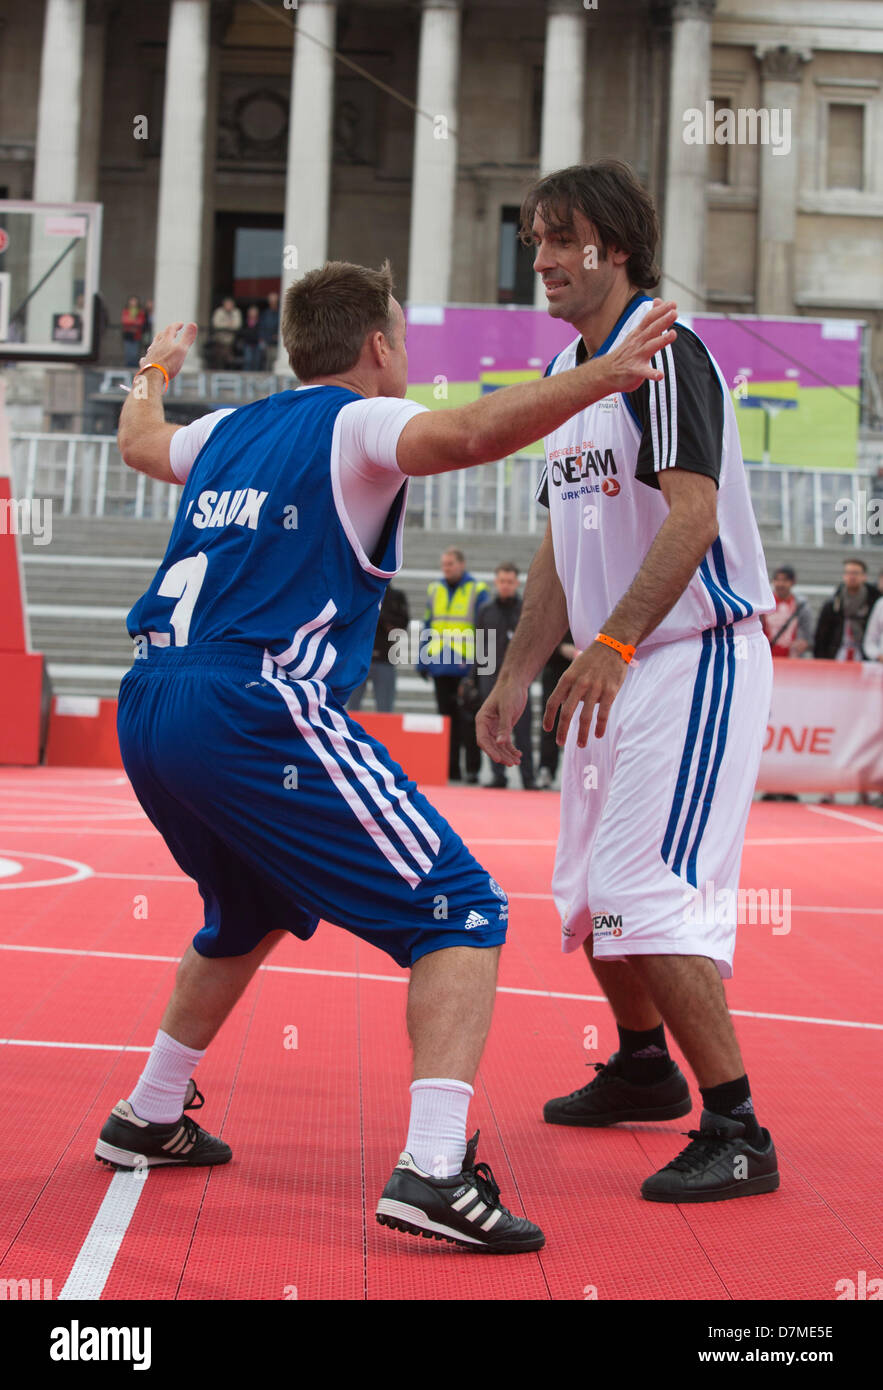 London, UK. 10th May 2013. Pictured: Graeme Le Saux and Robert Pires. UEFA and Euroleague Basketball greats joined athletes from the Special Olympics and the Tottenham Hotspur Foundation at the Turkish Airlines Euroleague Fan Zone in Trafalgar Square for a celebratory unified basketball game as part of the 2013 Final Four weekend festivities. The first-of-its-kind goodwill game was organized by One Team, the Euroleague’s social responsibility programme. It included football players Graeme Le Saux, Robert Pires & Christian Karembeu and Euroleague Basketball Legends Ramun © Nick Savage / Alamy Stock Photo